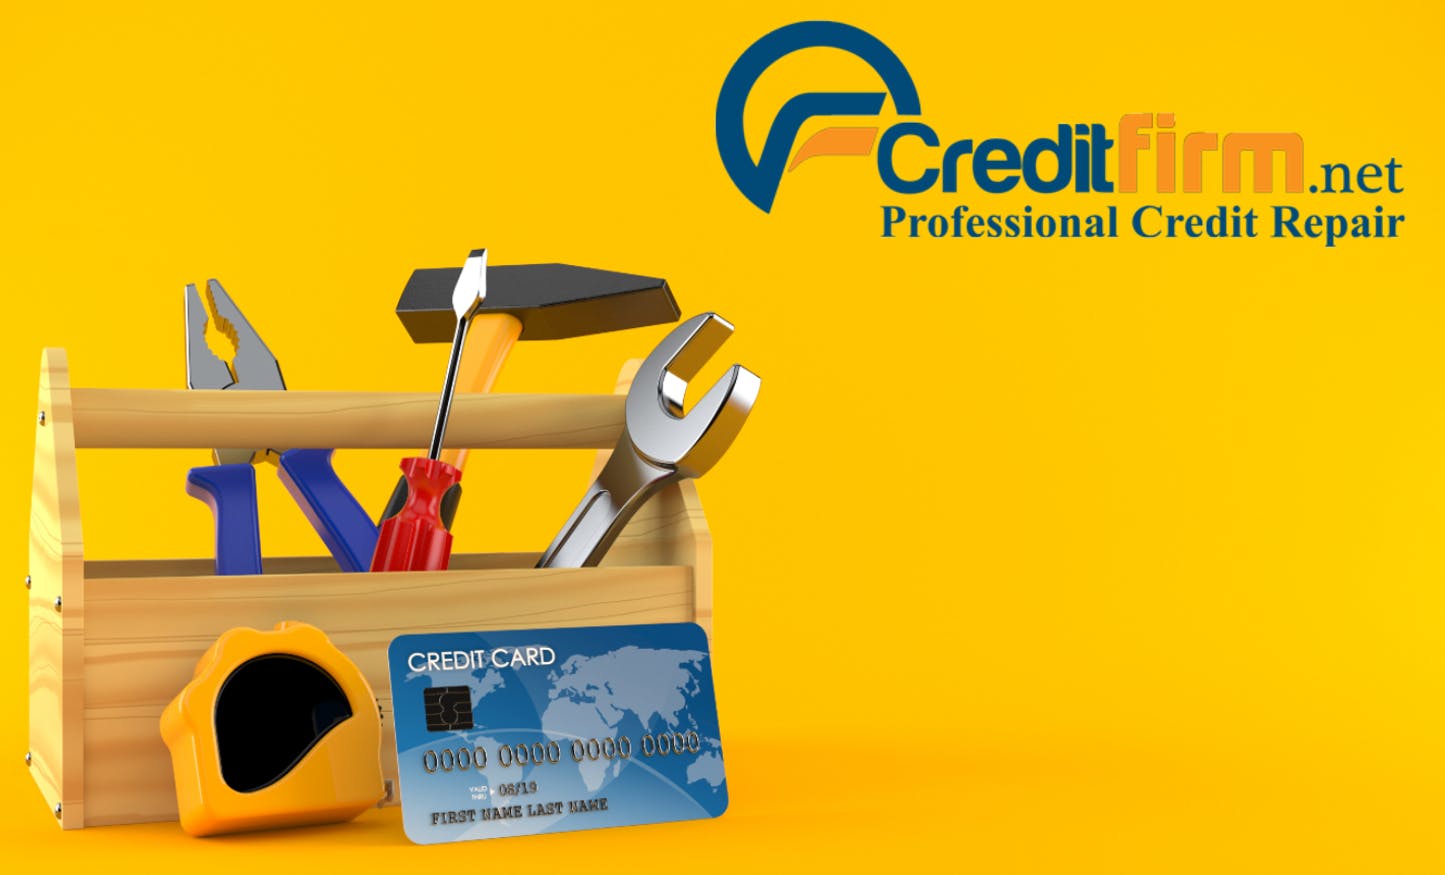 Credit Firm Review: Pricing, Credit Services, Pros and Cons, and More!